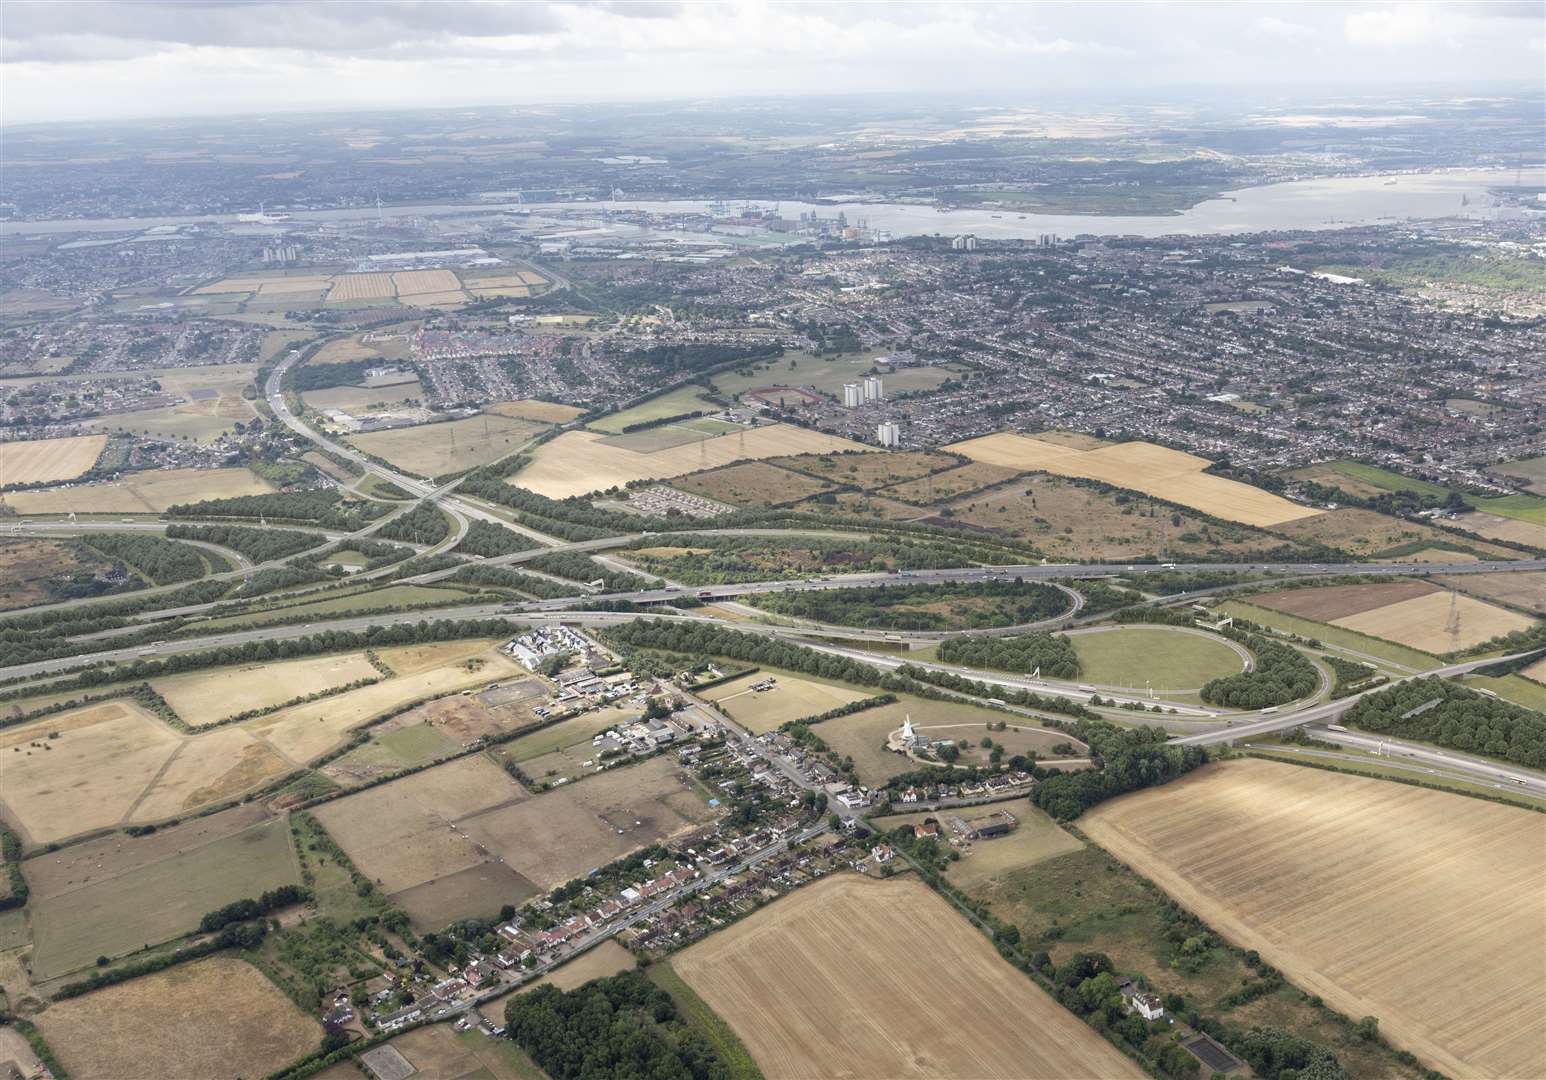 Proposed view of A13 and A1089 looking south, Lower Thames Crossing. Picture: Joas Souza